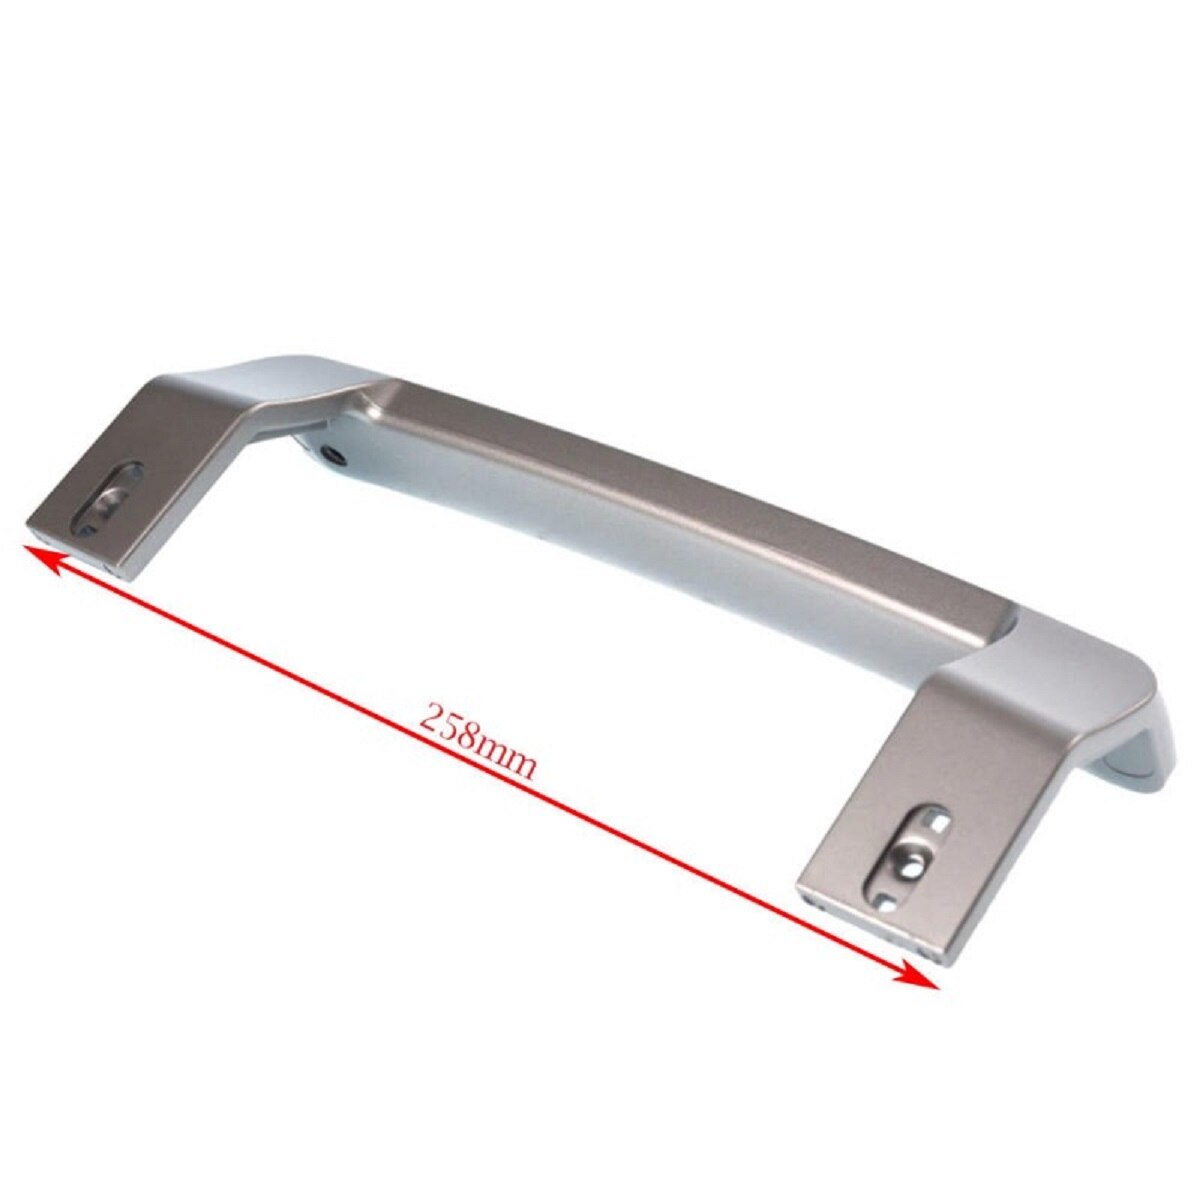 Fridge Refrigerator Door Handle For Beko Compatible with B73-B84-B93-B95 Series CH140000D and Other Models 4900061200-4900060500